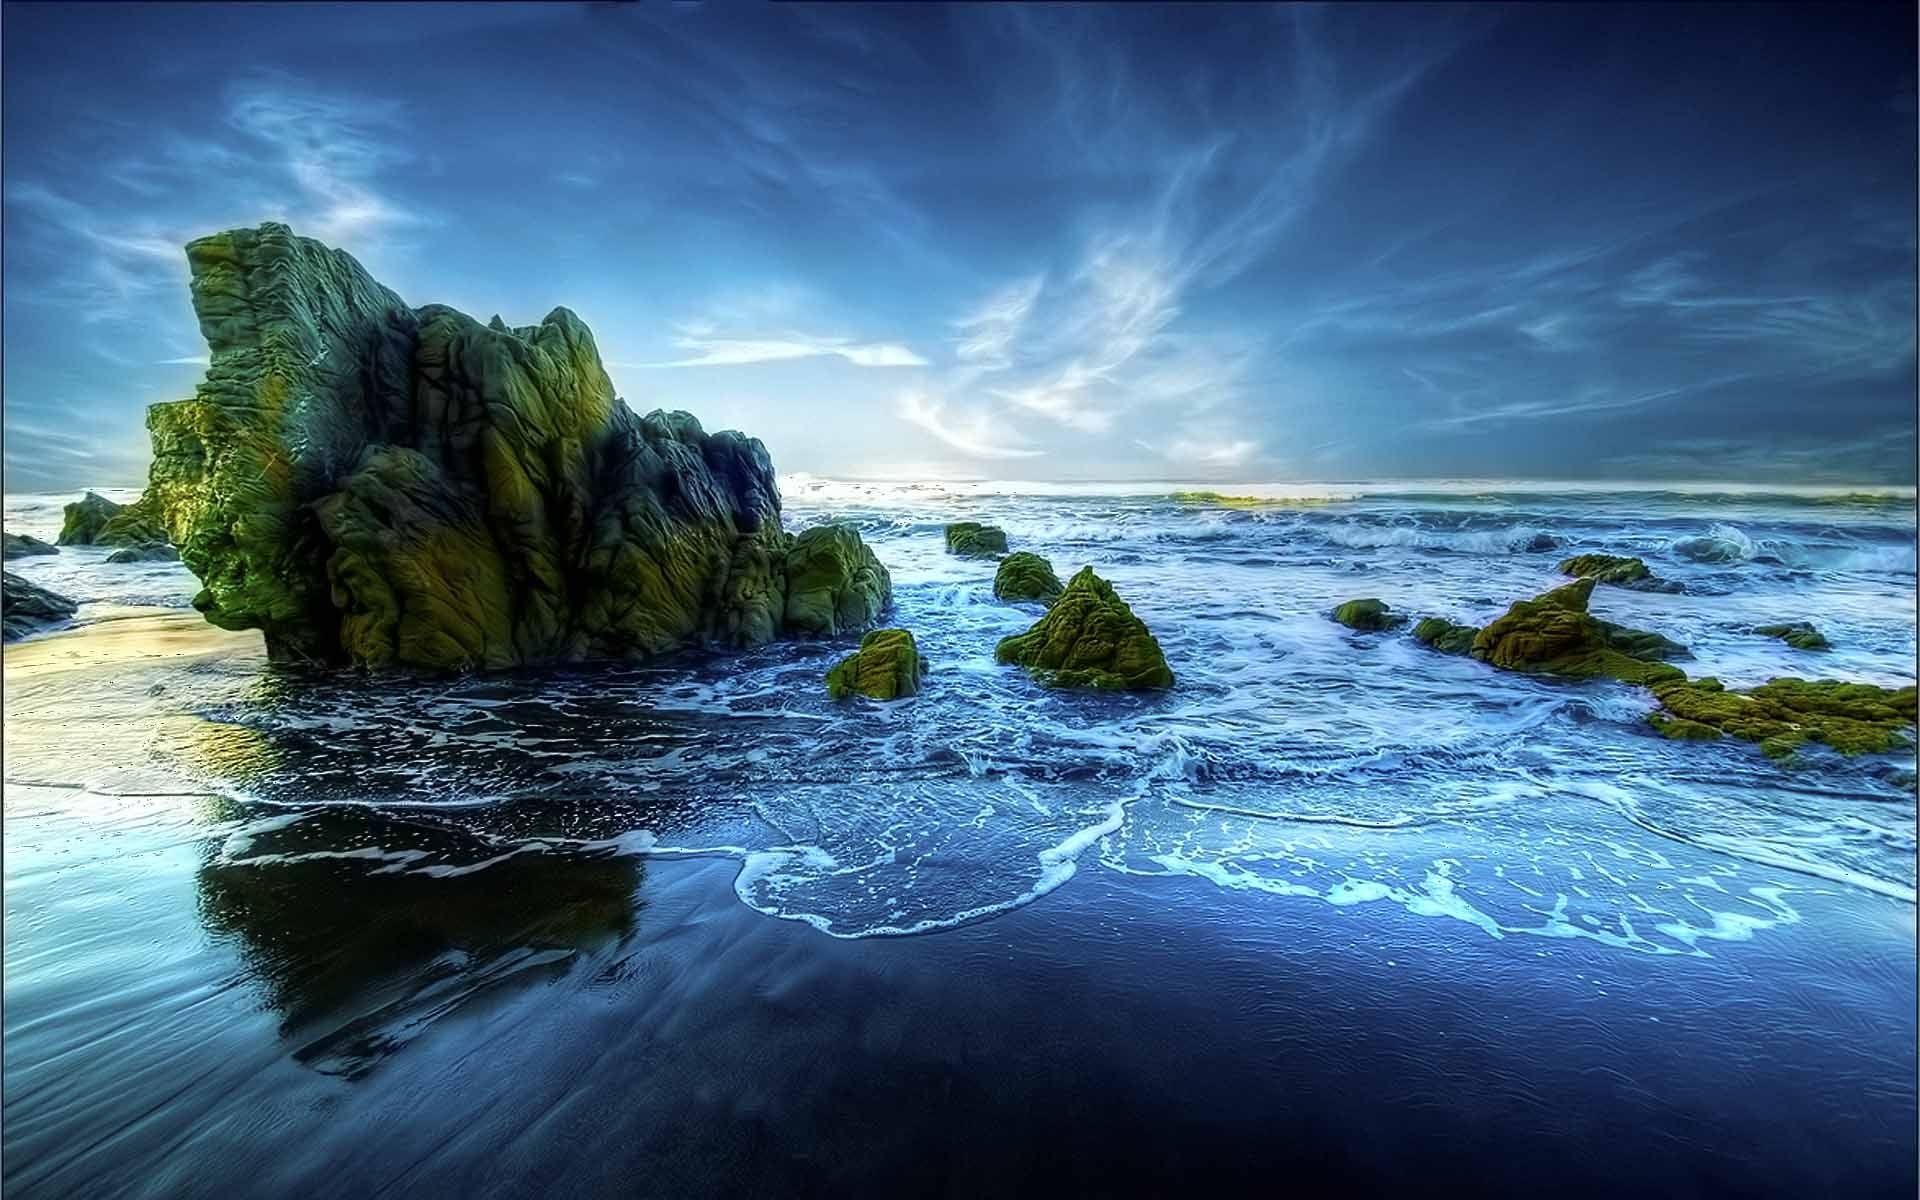  download Best 40 Peaceful Wallpapers on HipWallpaper Peaceful 1920x1200